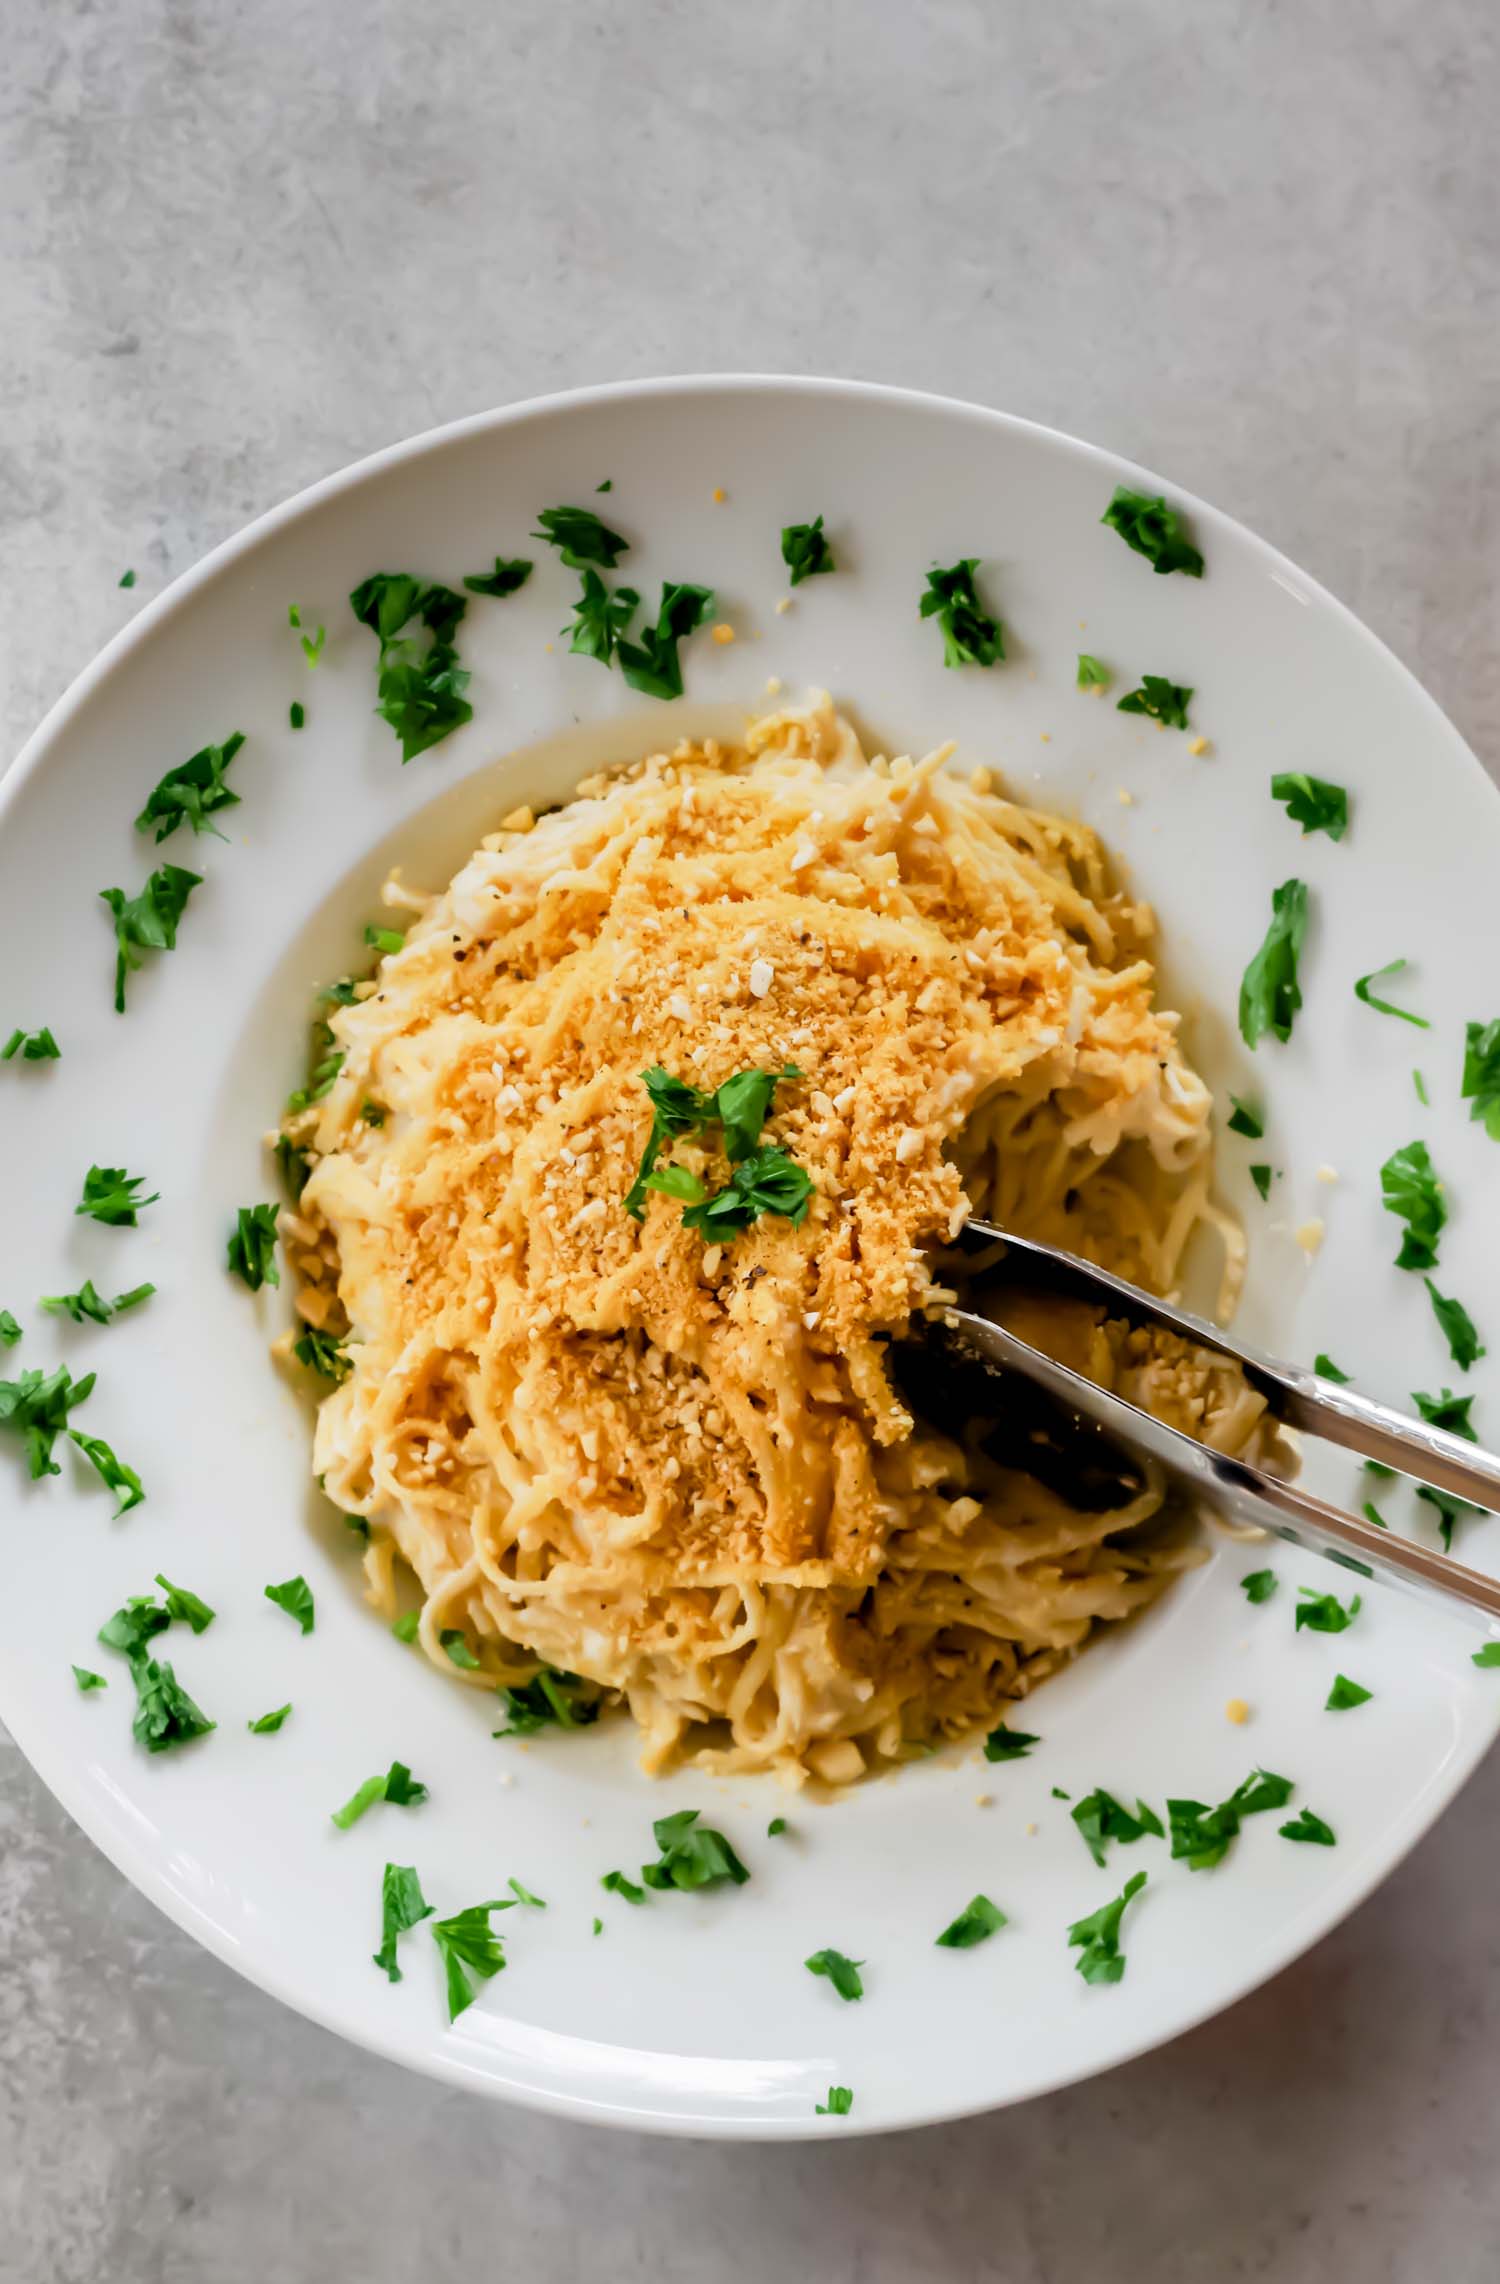 Lighter (and better that way) Cauliflower Fettuccine Alfredo, Recipe from Fuss-Free Vegan Cookbook | made with quinoa linguini noodles